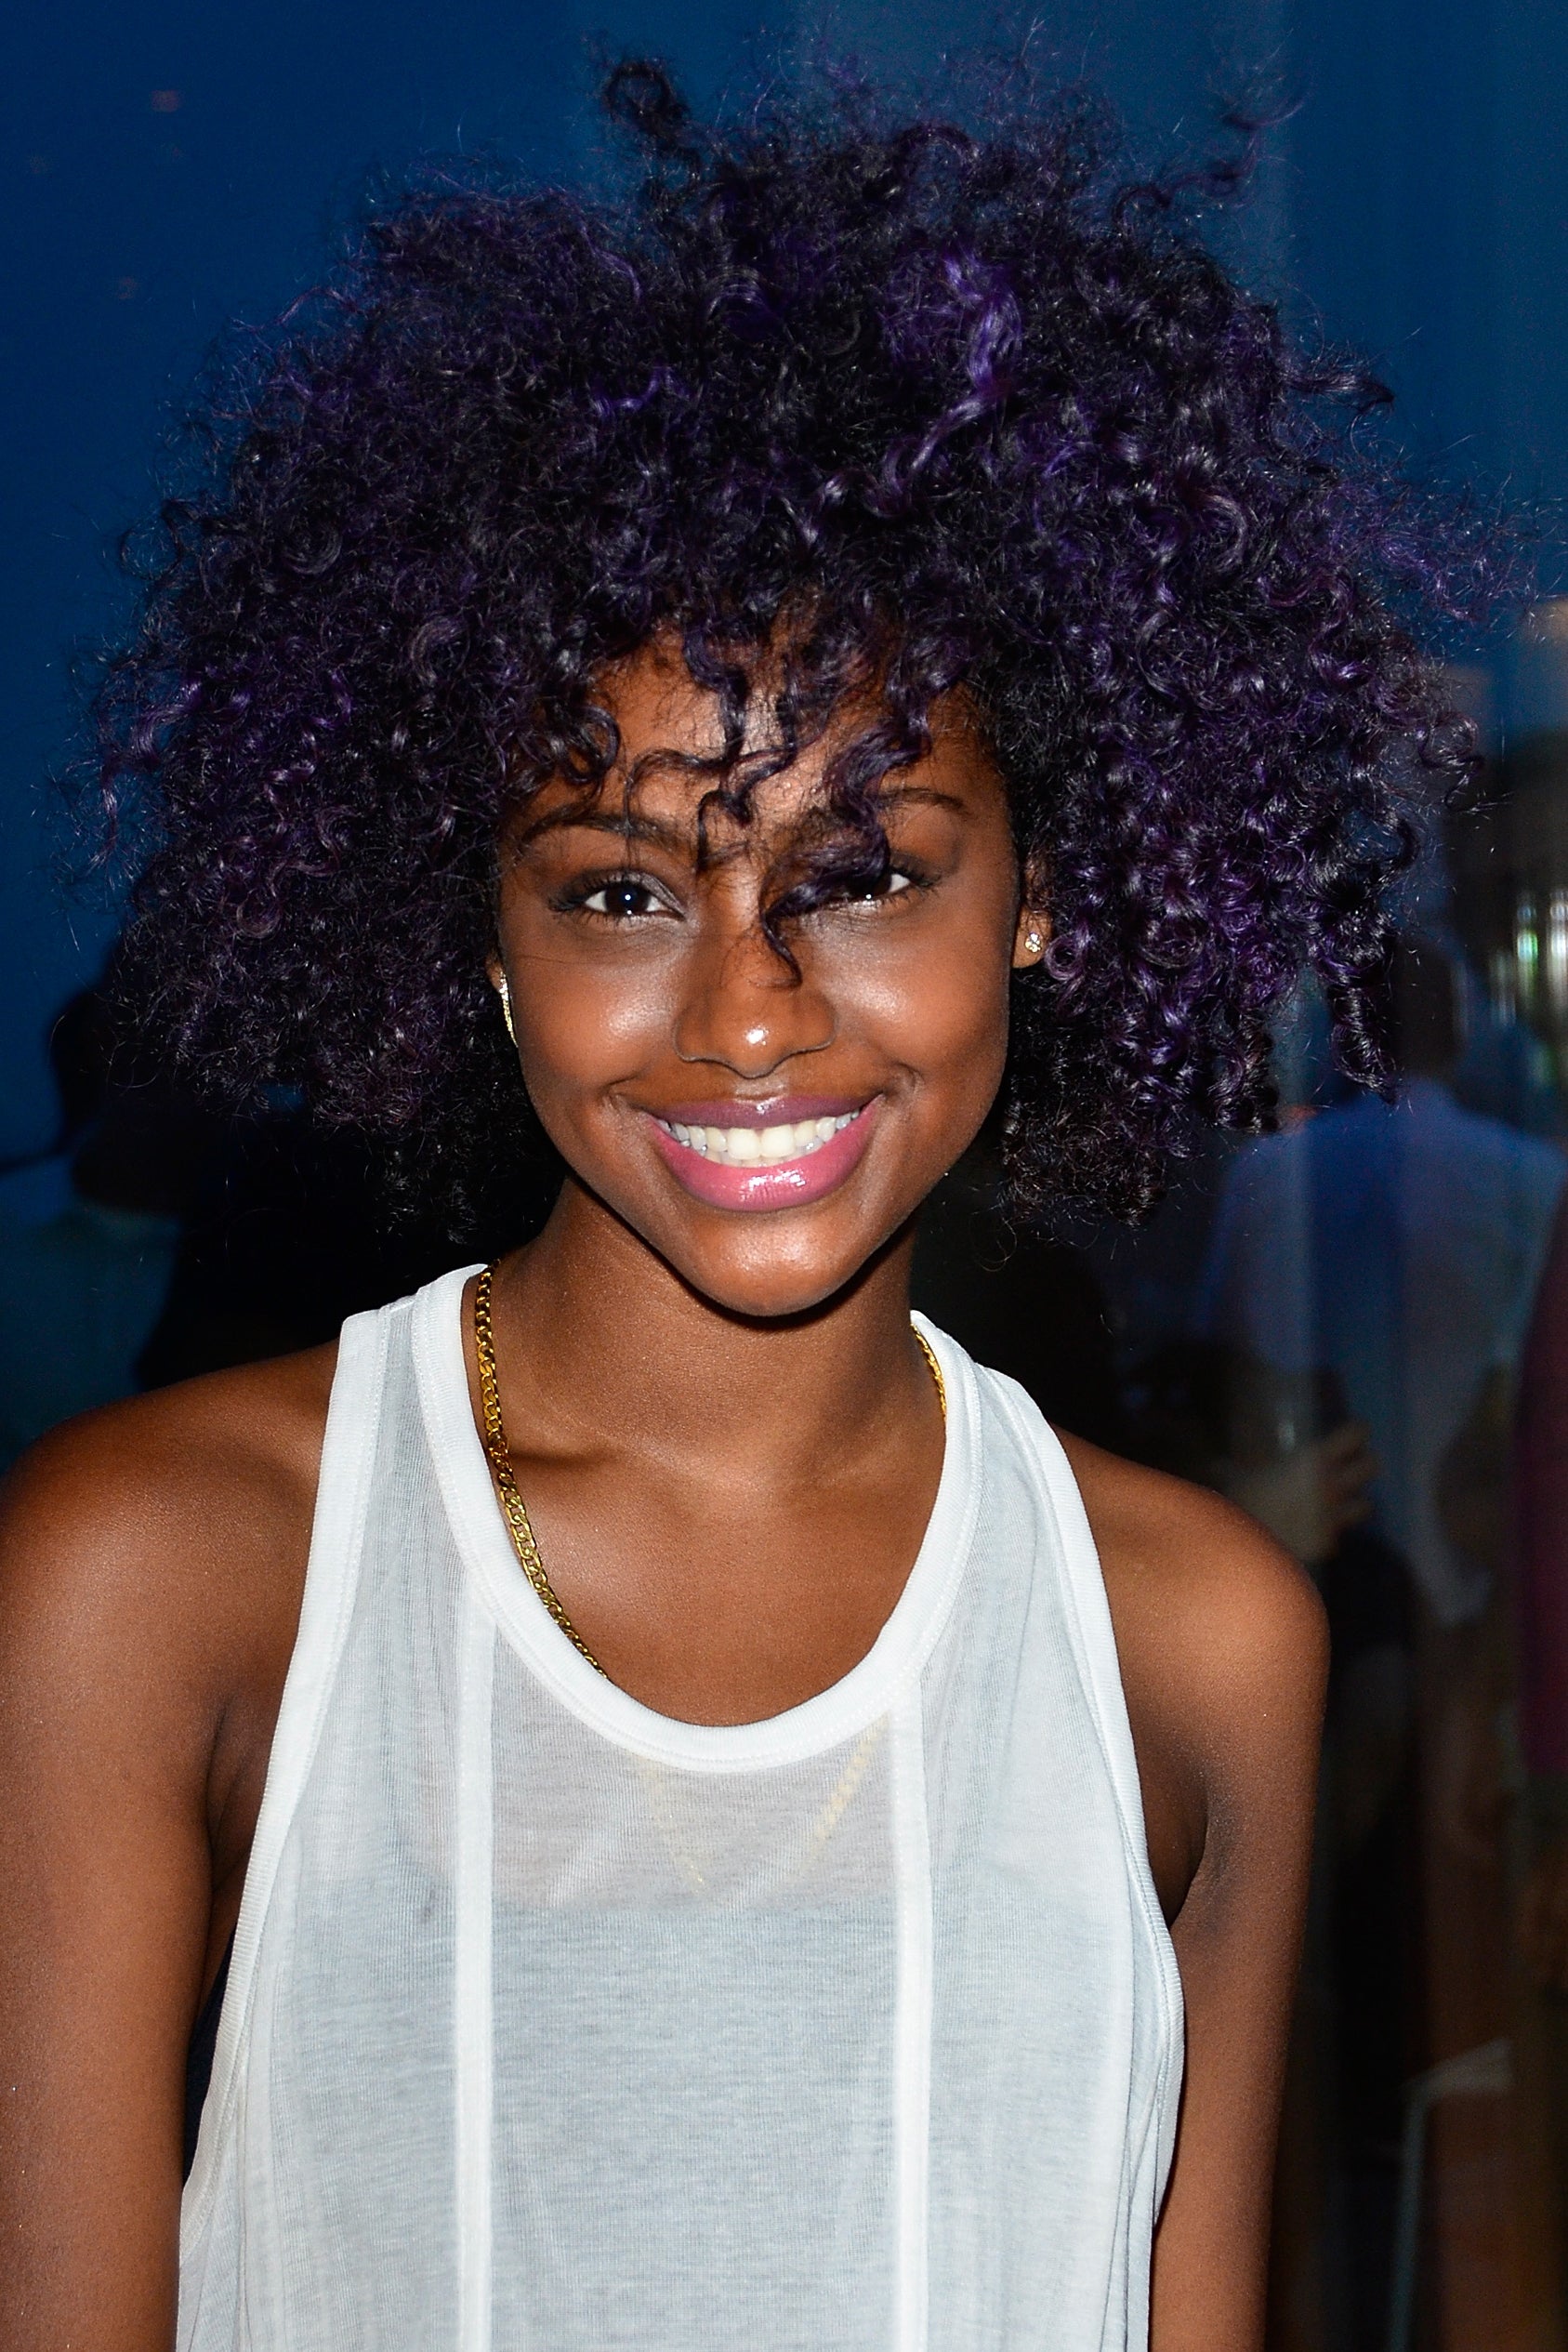 Justine Skye's Purple Braids Are Getting Us Excited For Festival Season
